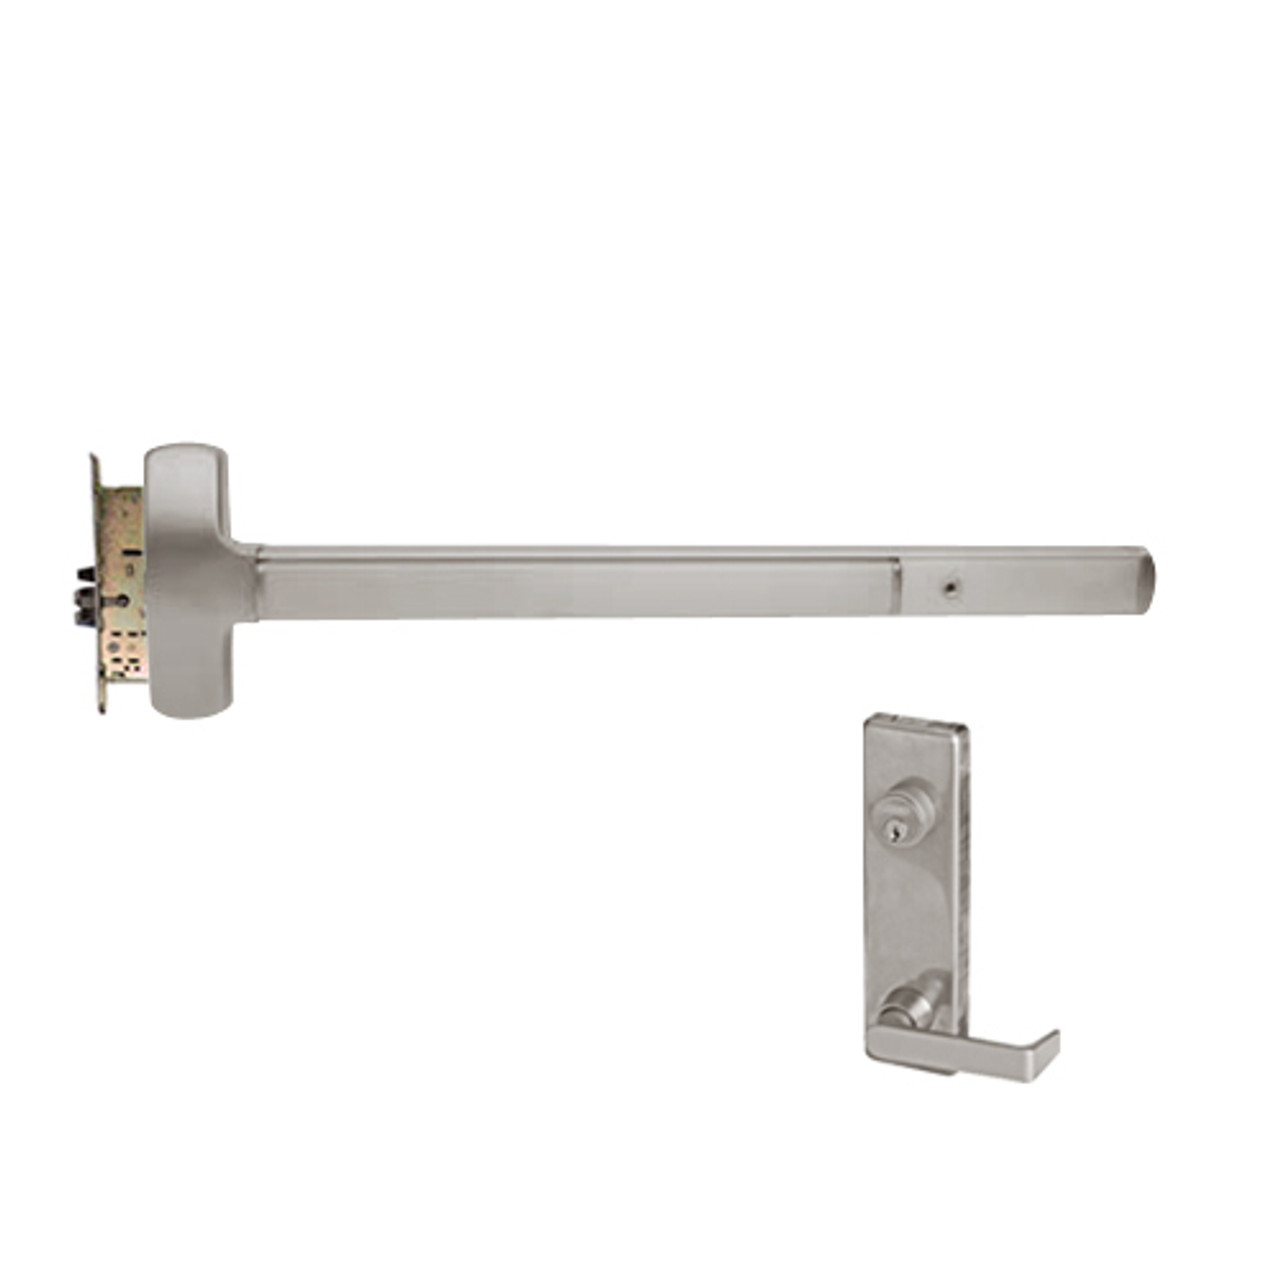 25-M-L-DANE-US32D-3-RHR Falcon Exit Device in Satin Stainless Steel